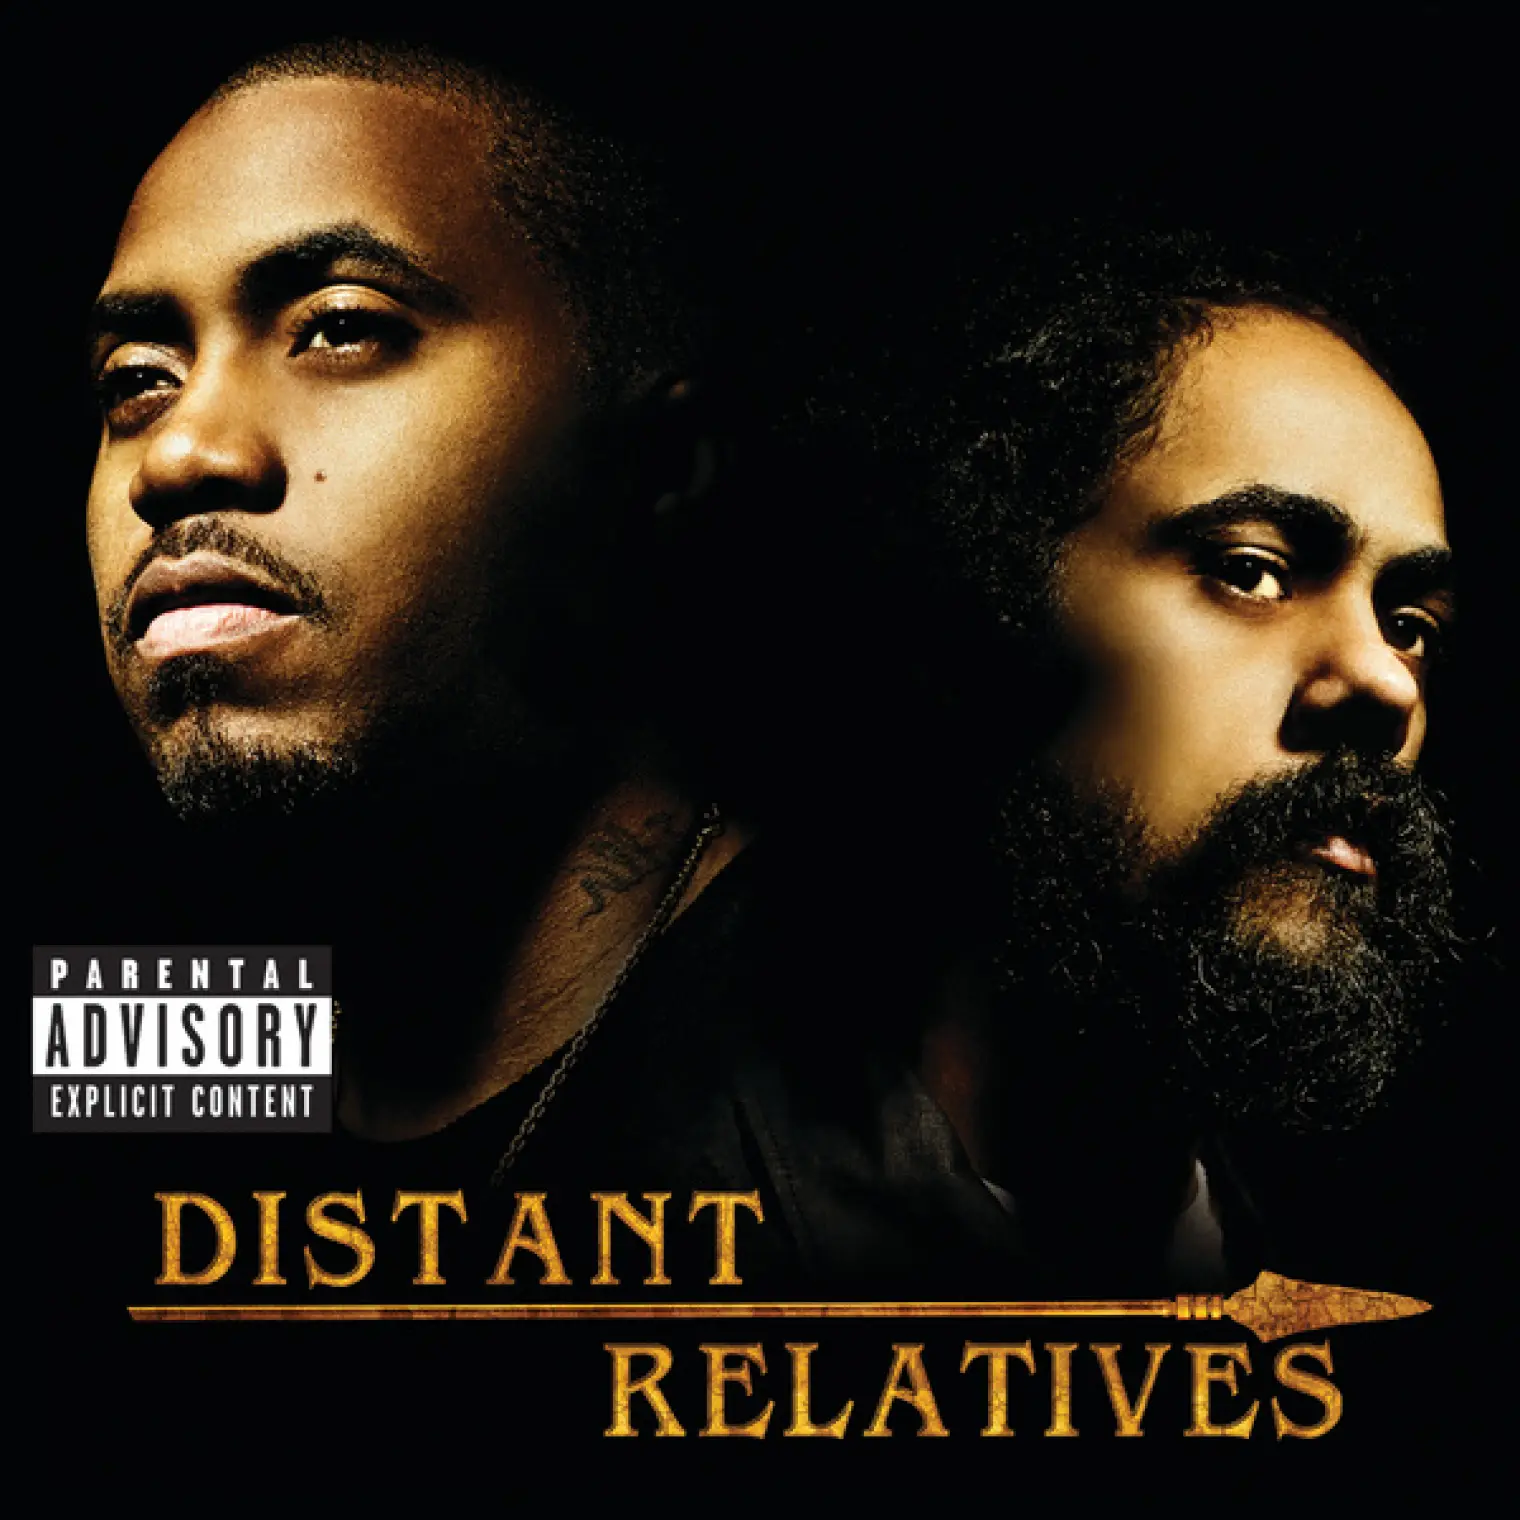 Distant Relatives -  Damian "Jr. Gong" Marley 